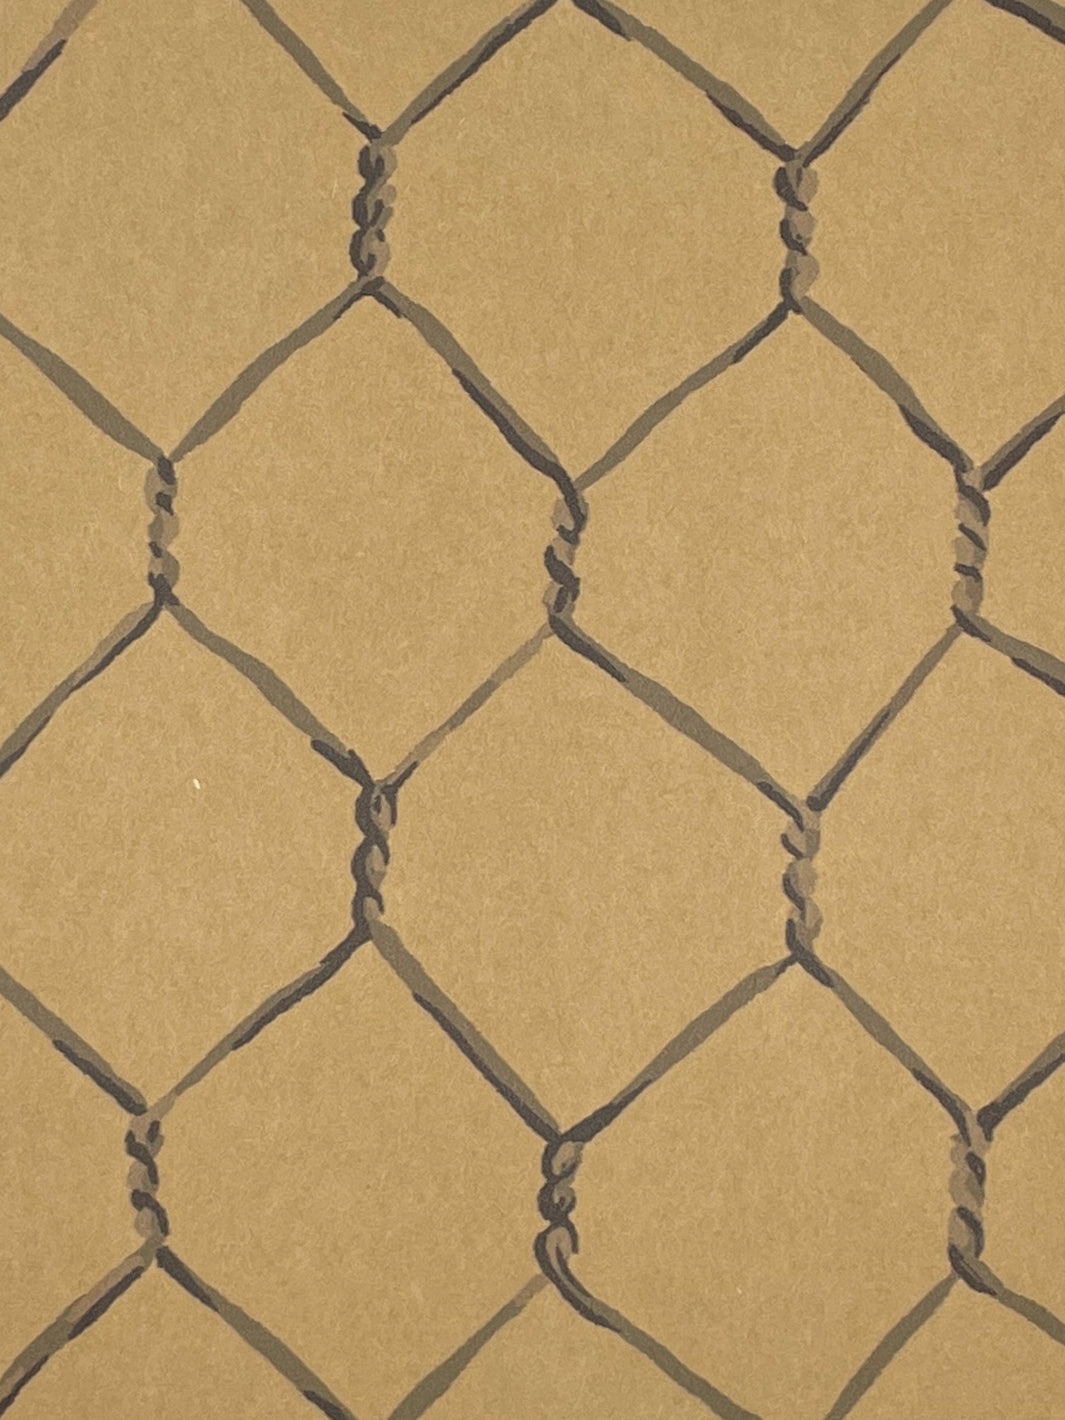 'Evelyn's Chicken Wire' Kraft' Wallpaper by Sarah Jessica Parker - Metal